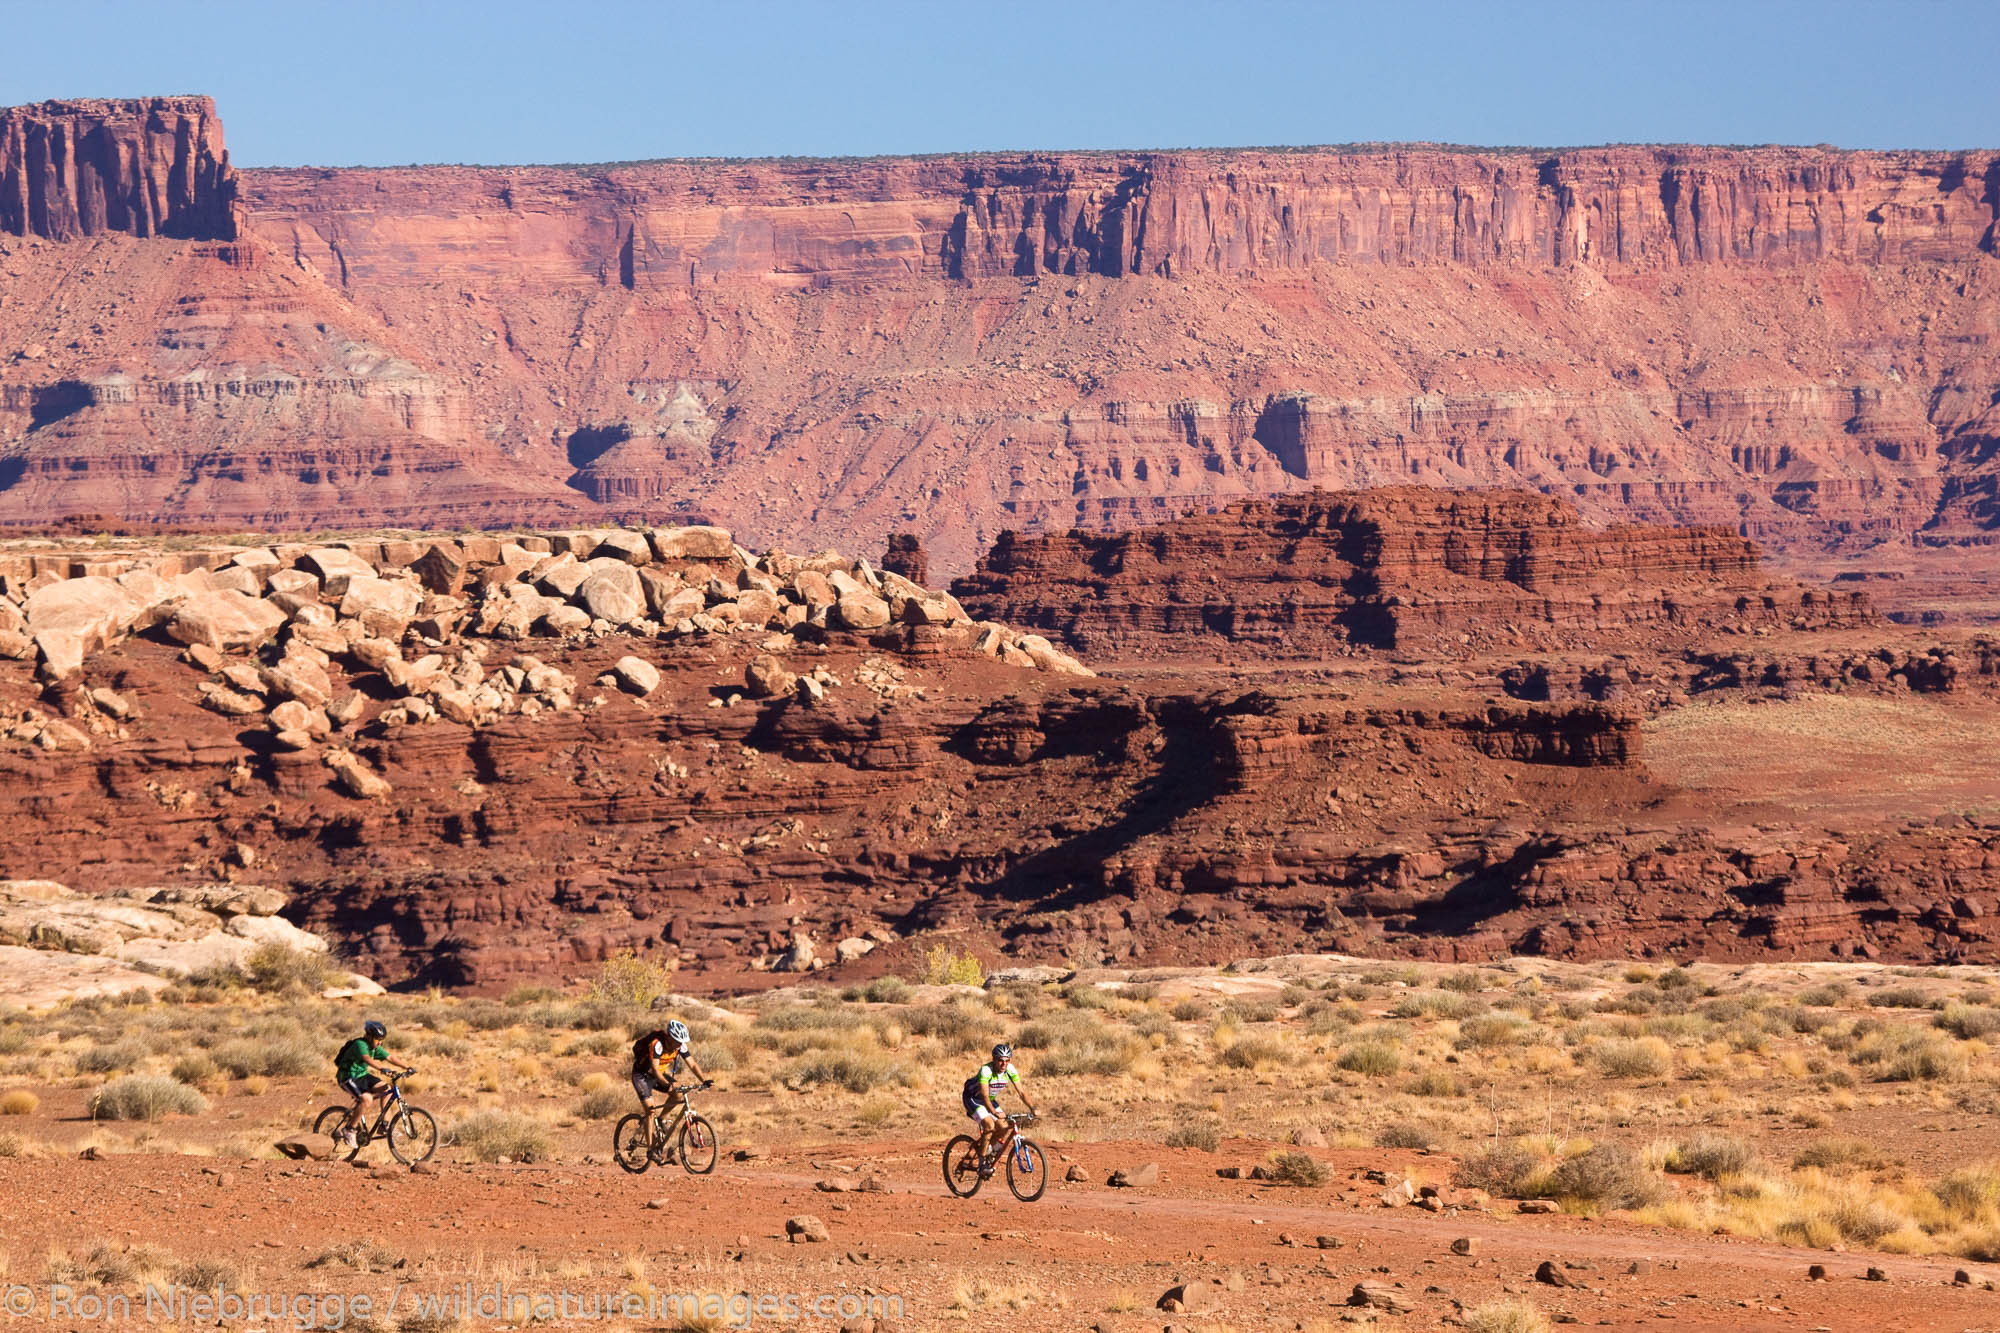 Mountain biking on the White Rim Trail, Island in the Sky District, Canyonlands National Park, near Moab, Utah.